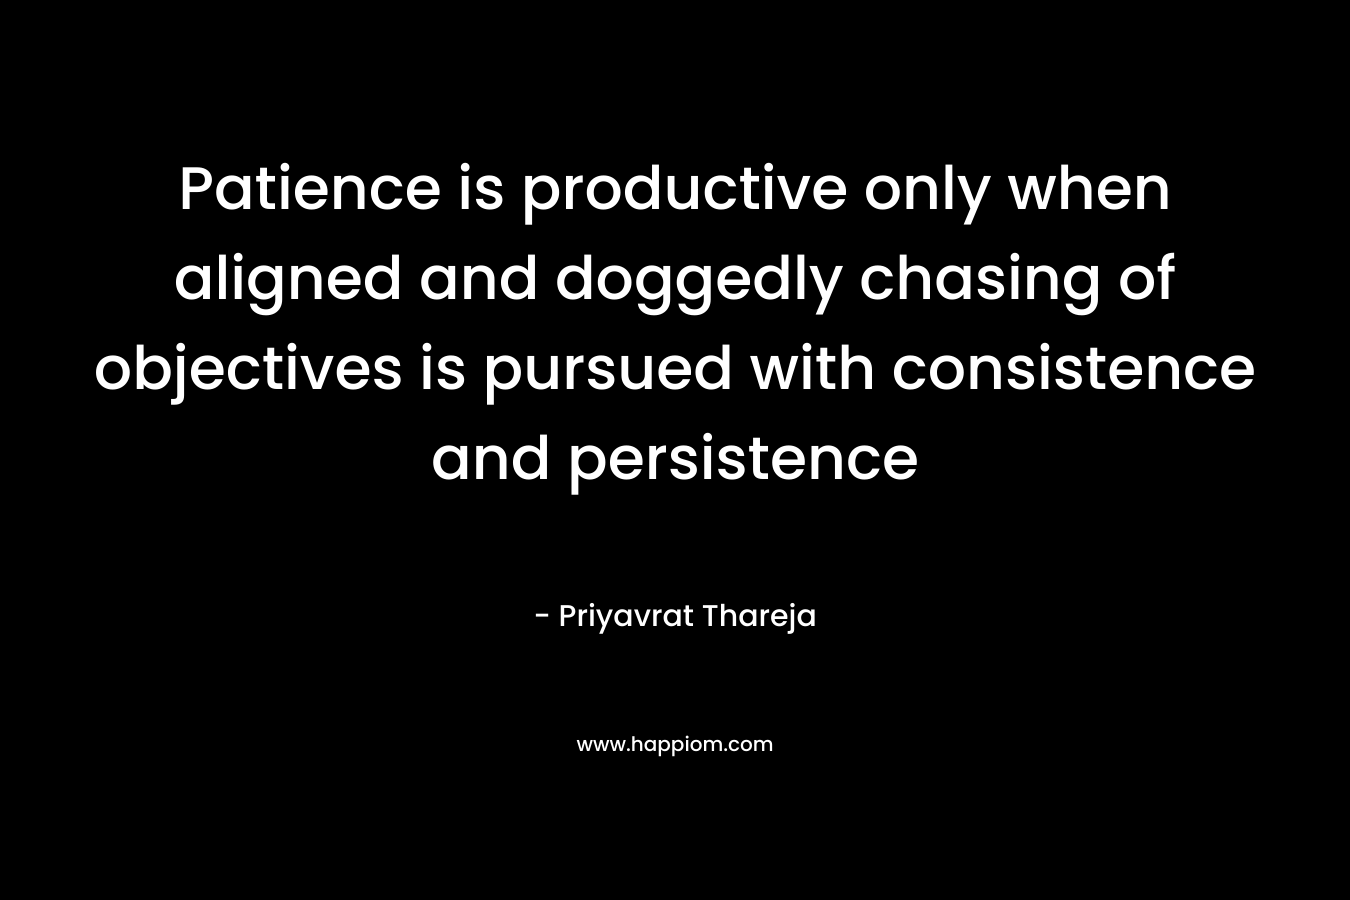 Patience is productive only when aligned and doggedly chasing of objectives is pursued with consistence and persistence